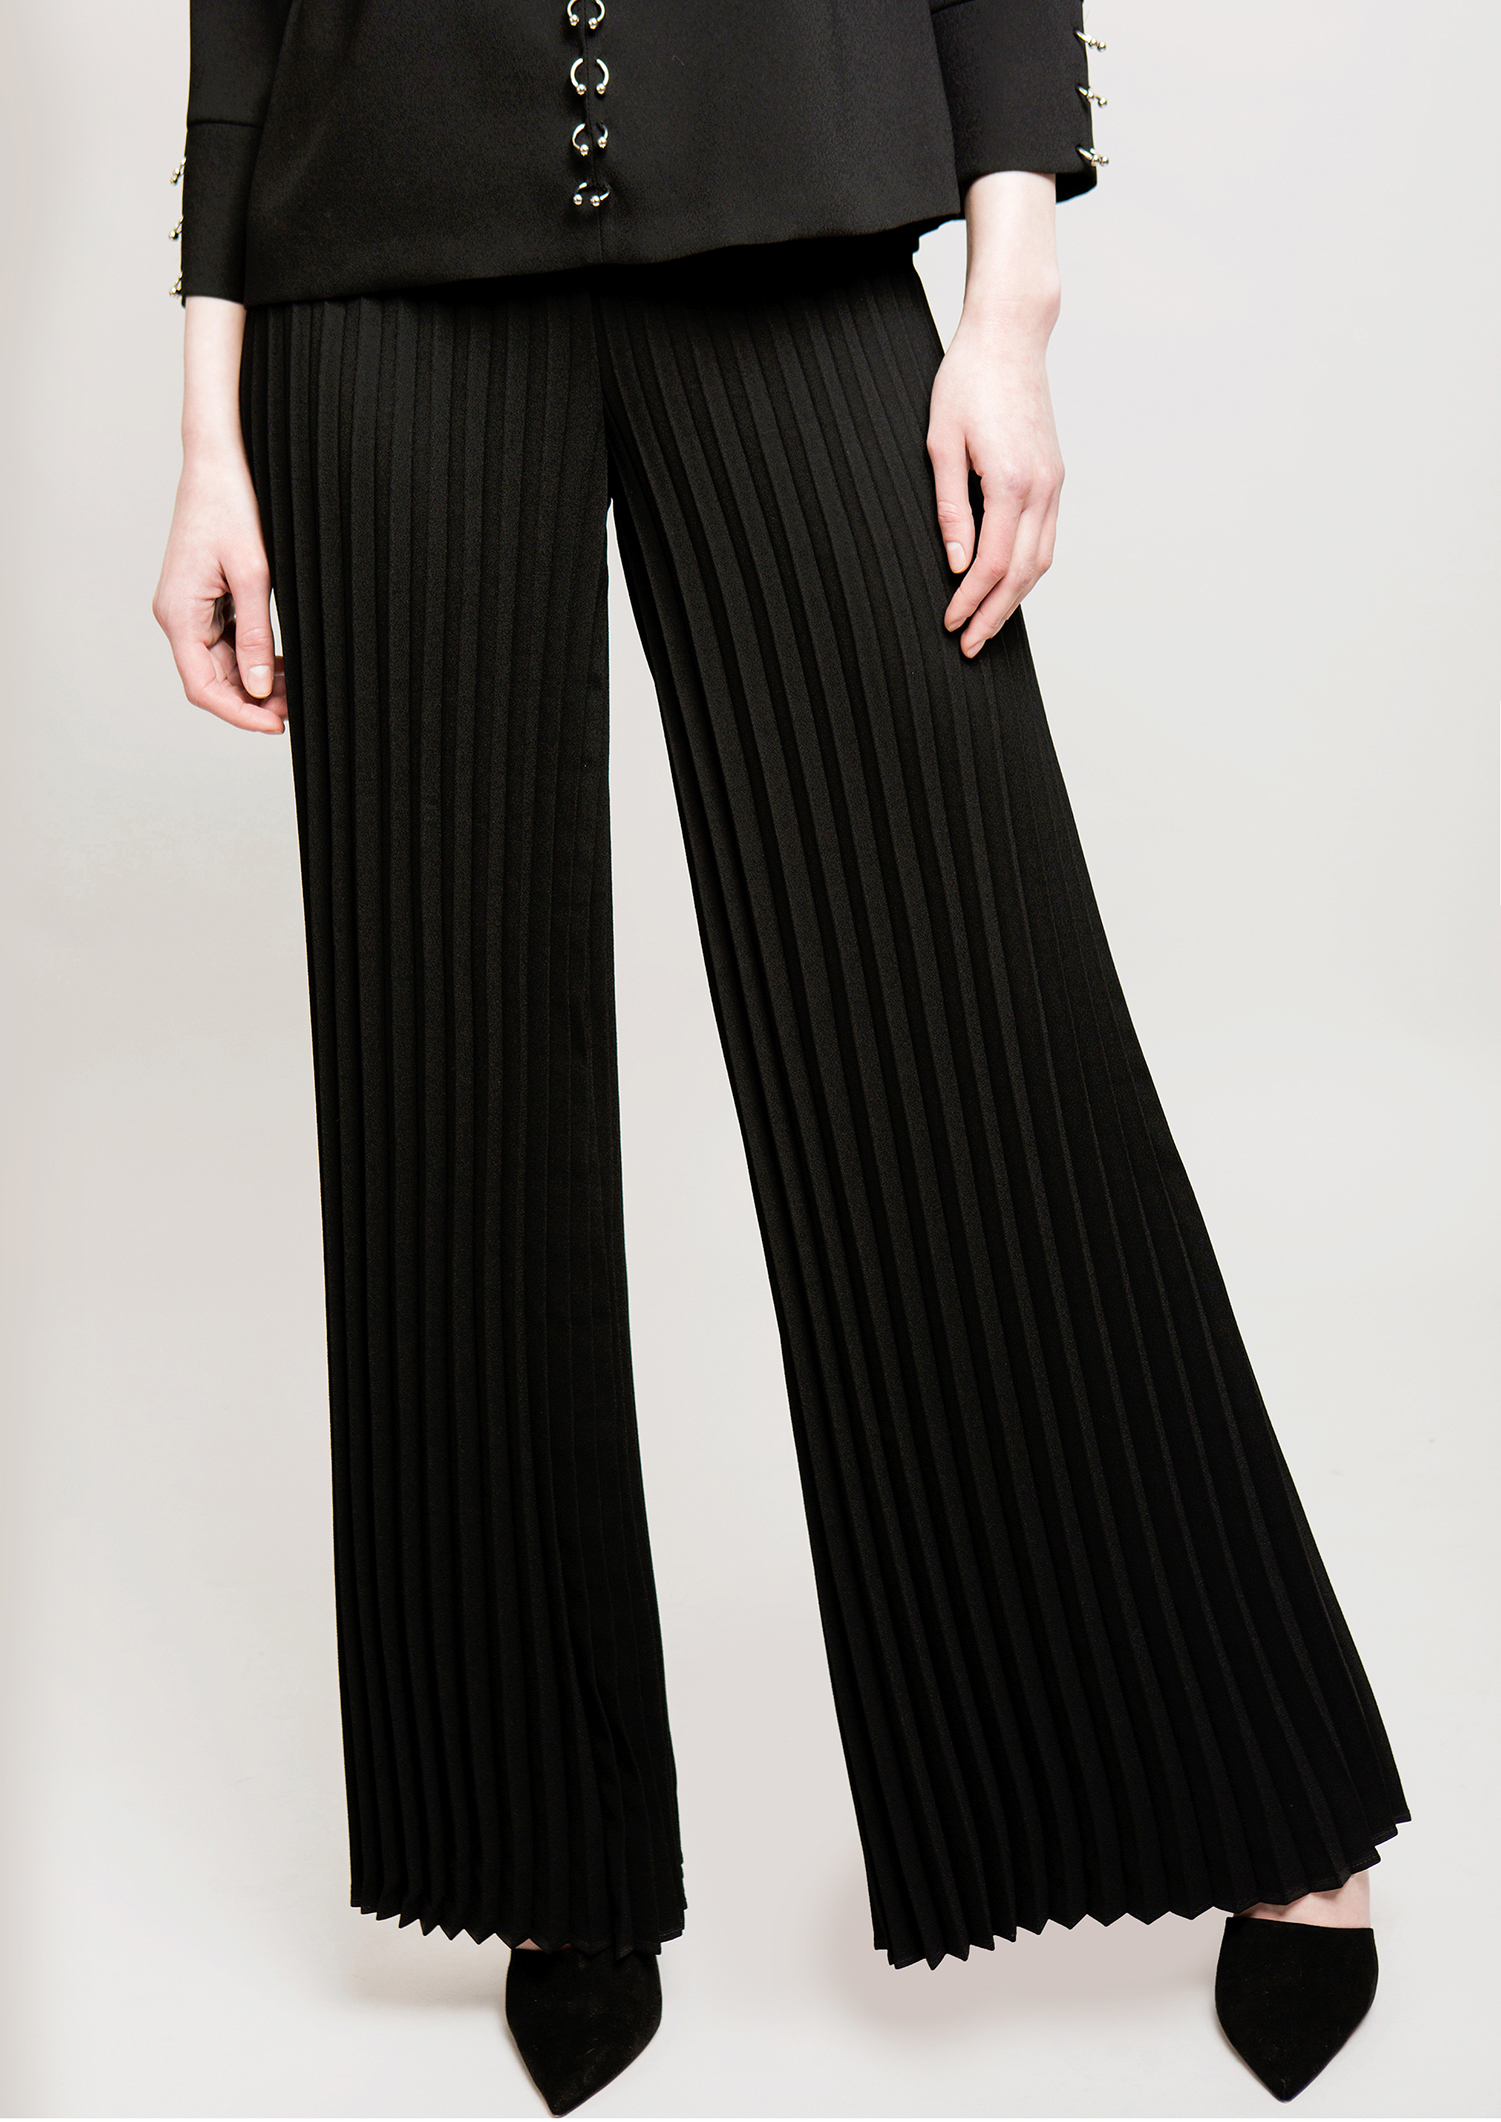 Black pleated trousers.